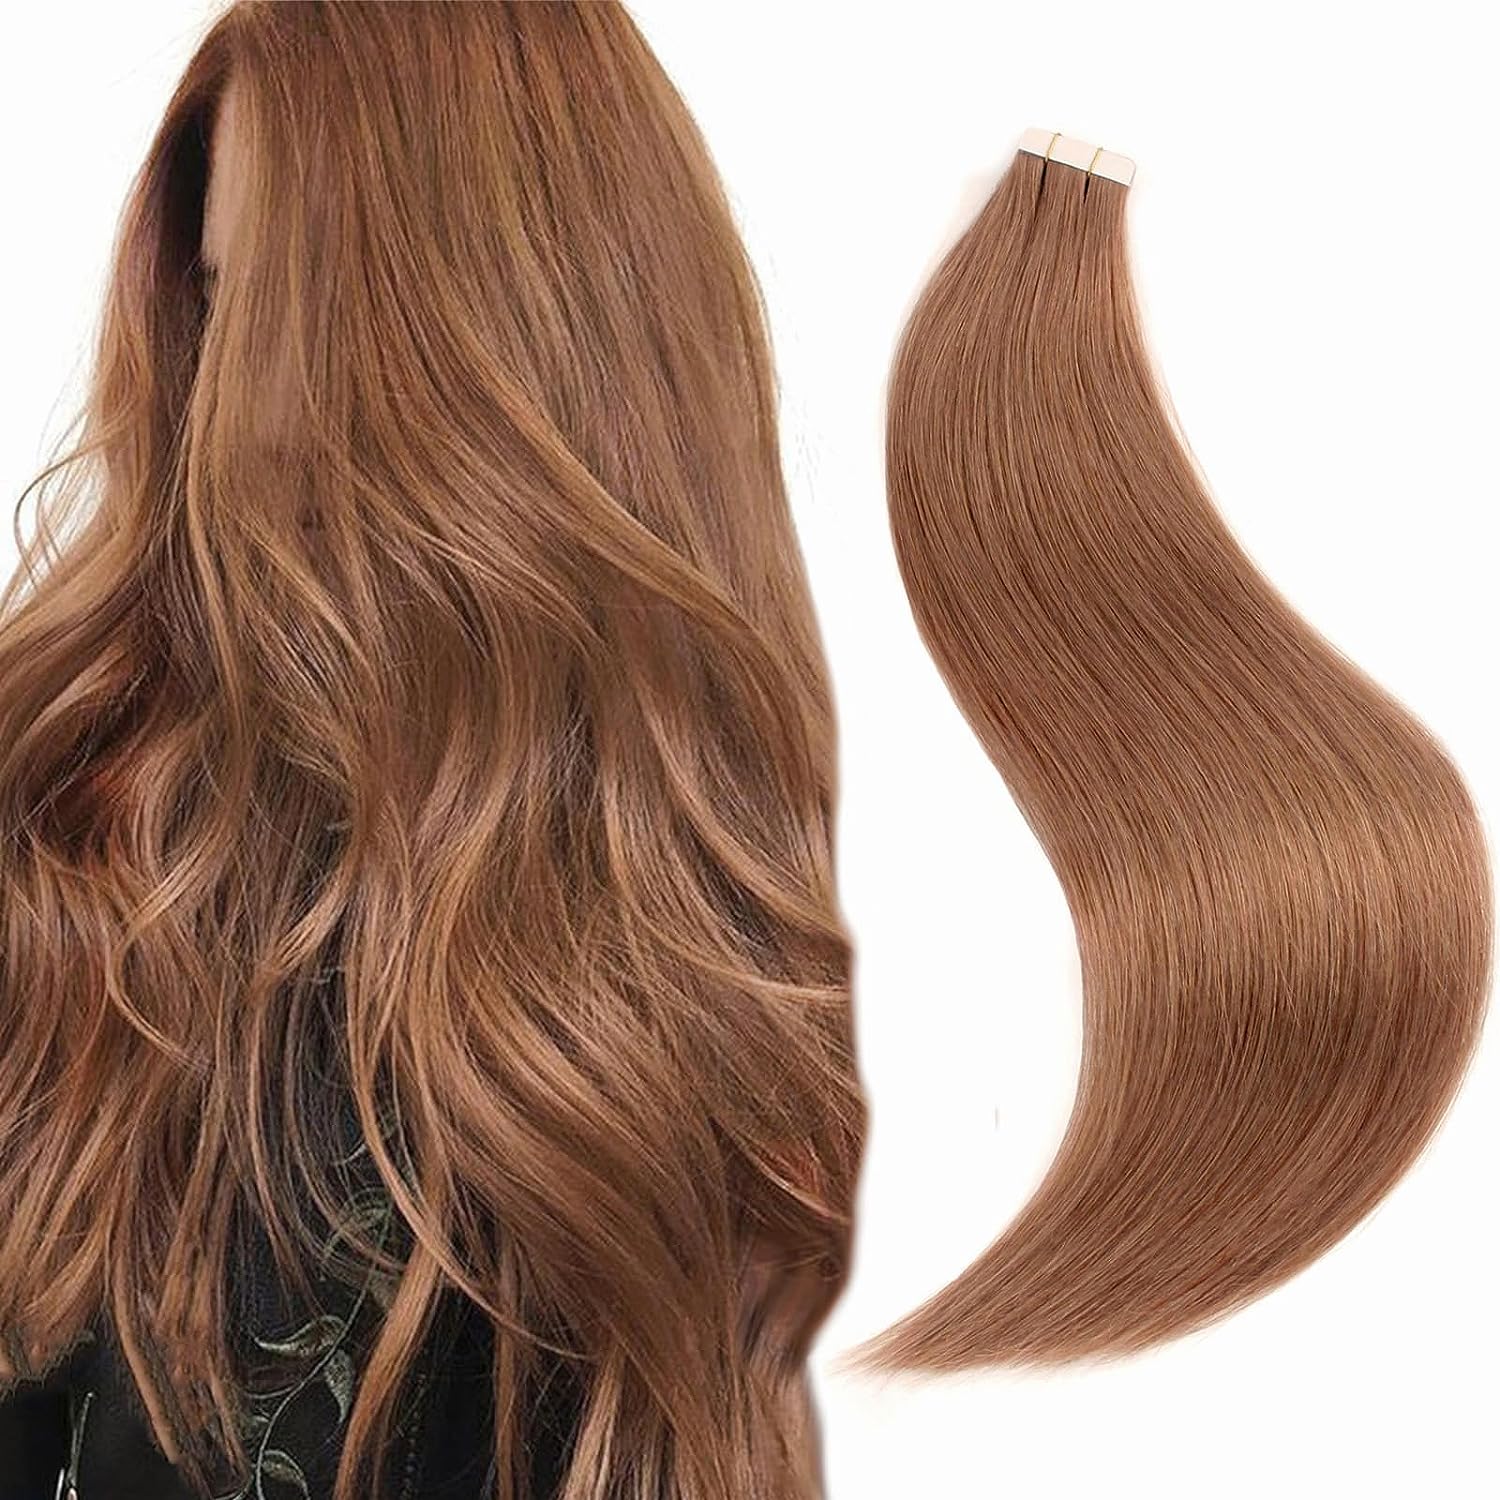 Sixstarhair Remy Hair Extensions Tape In Human Hair [...]